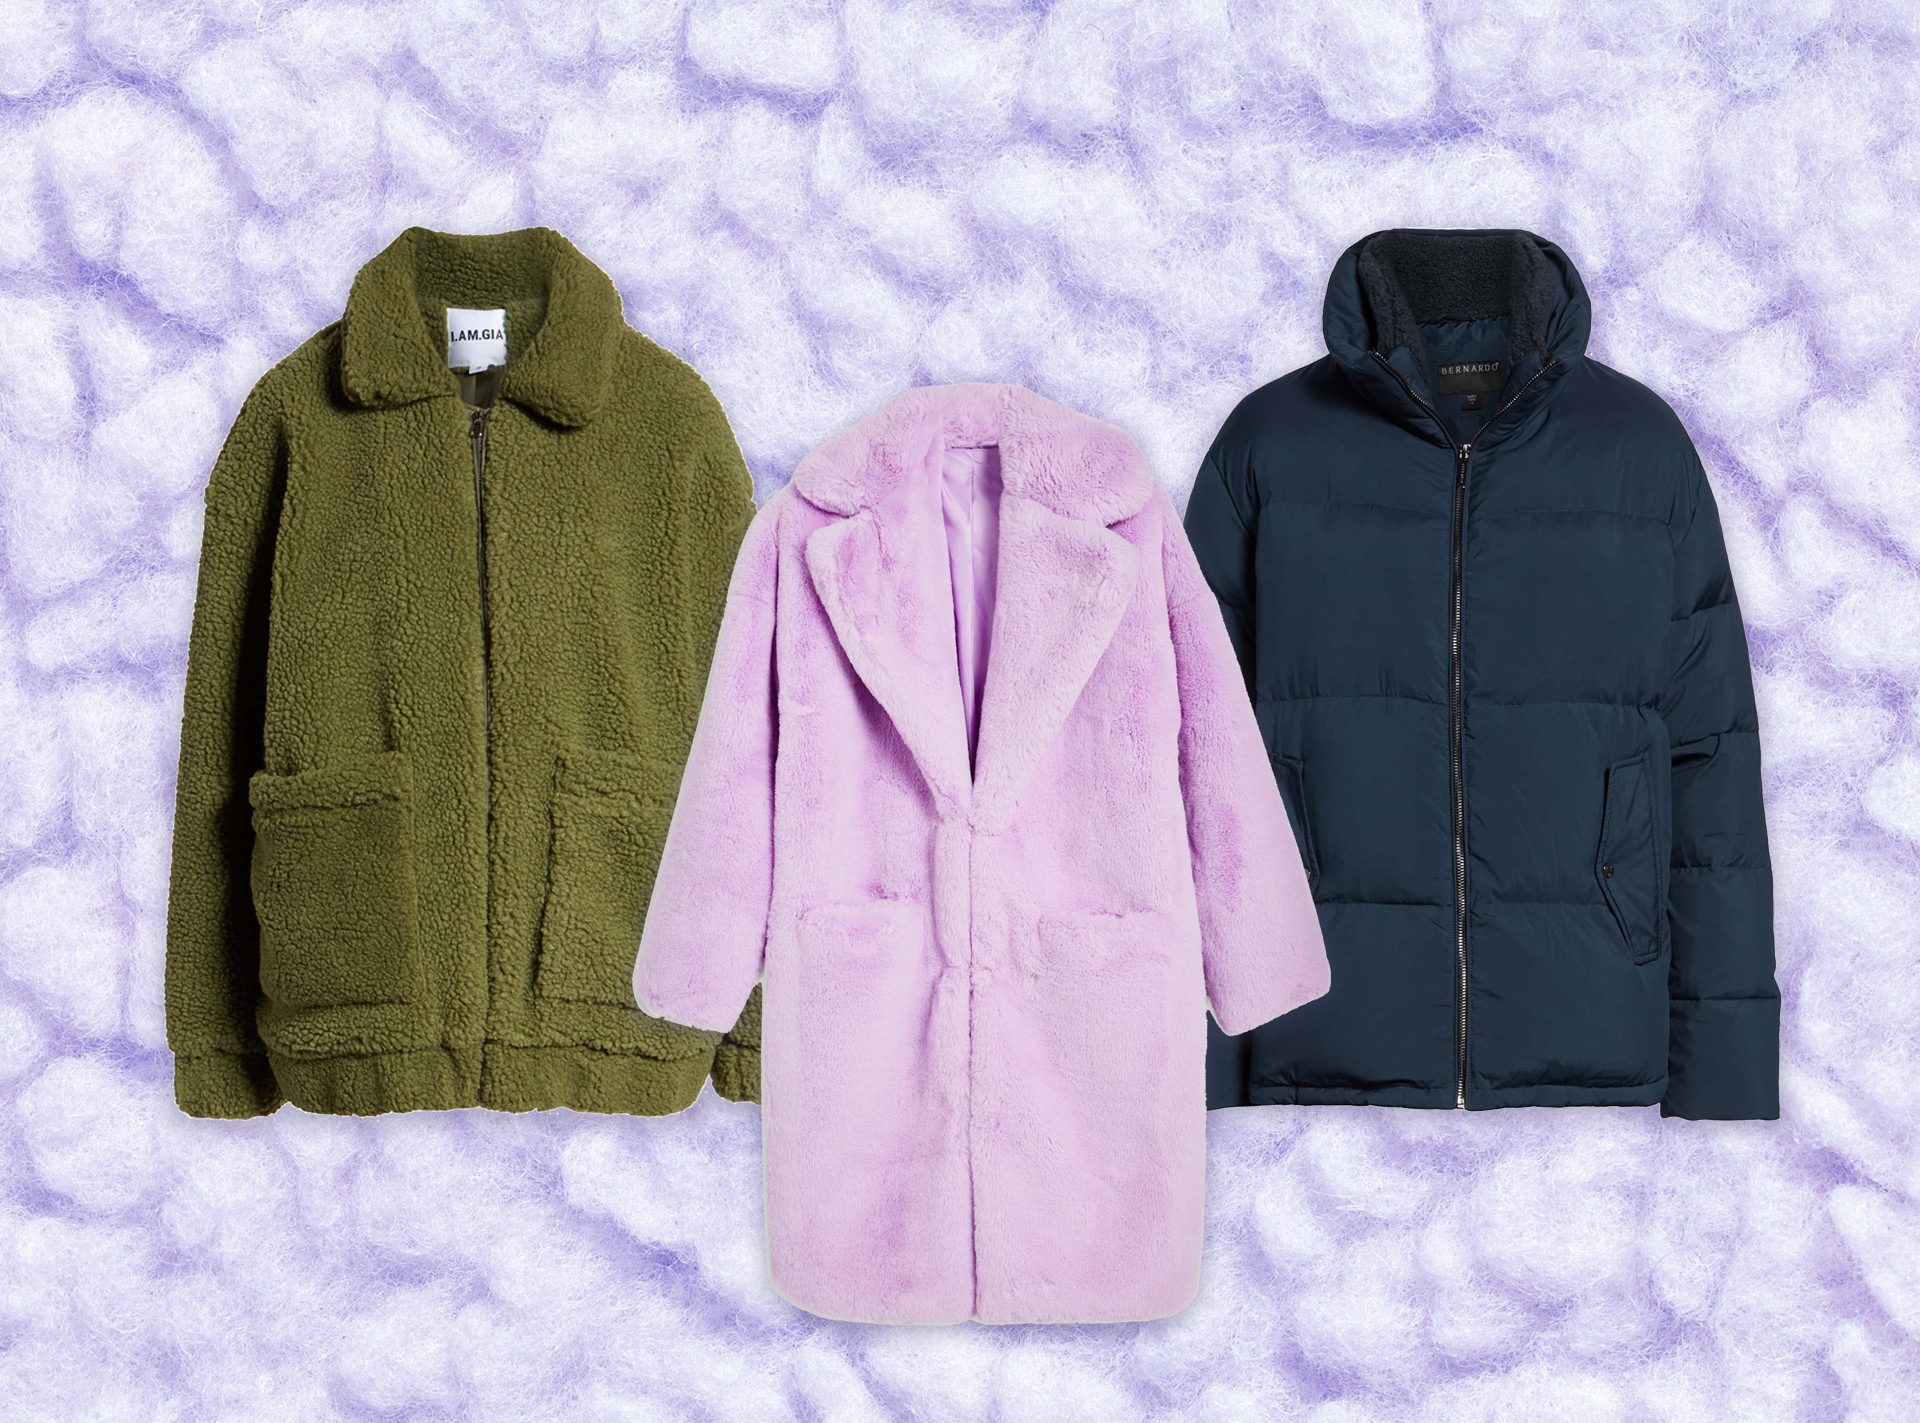 E-Comm: Oversized Jackets for the It Girl 